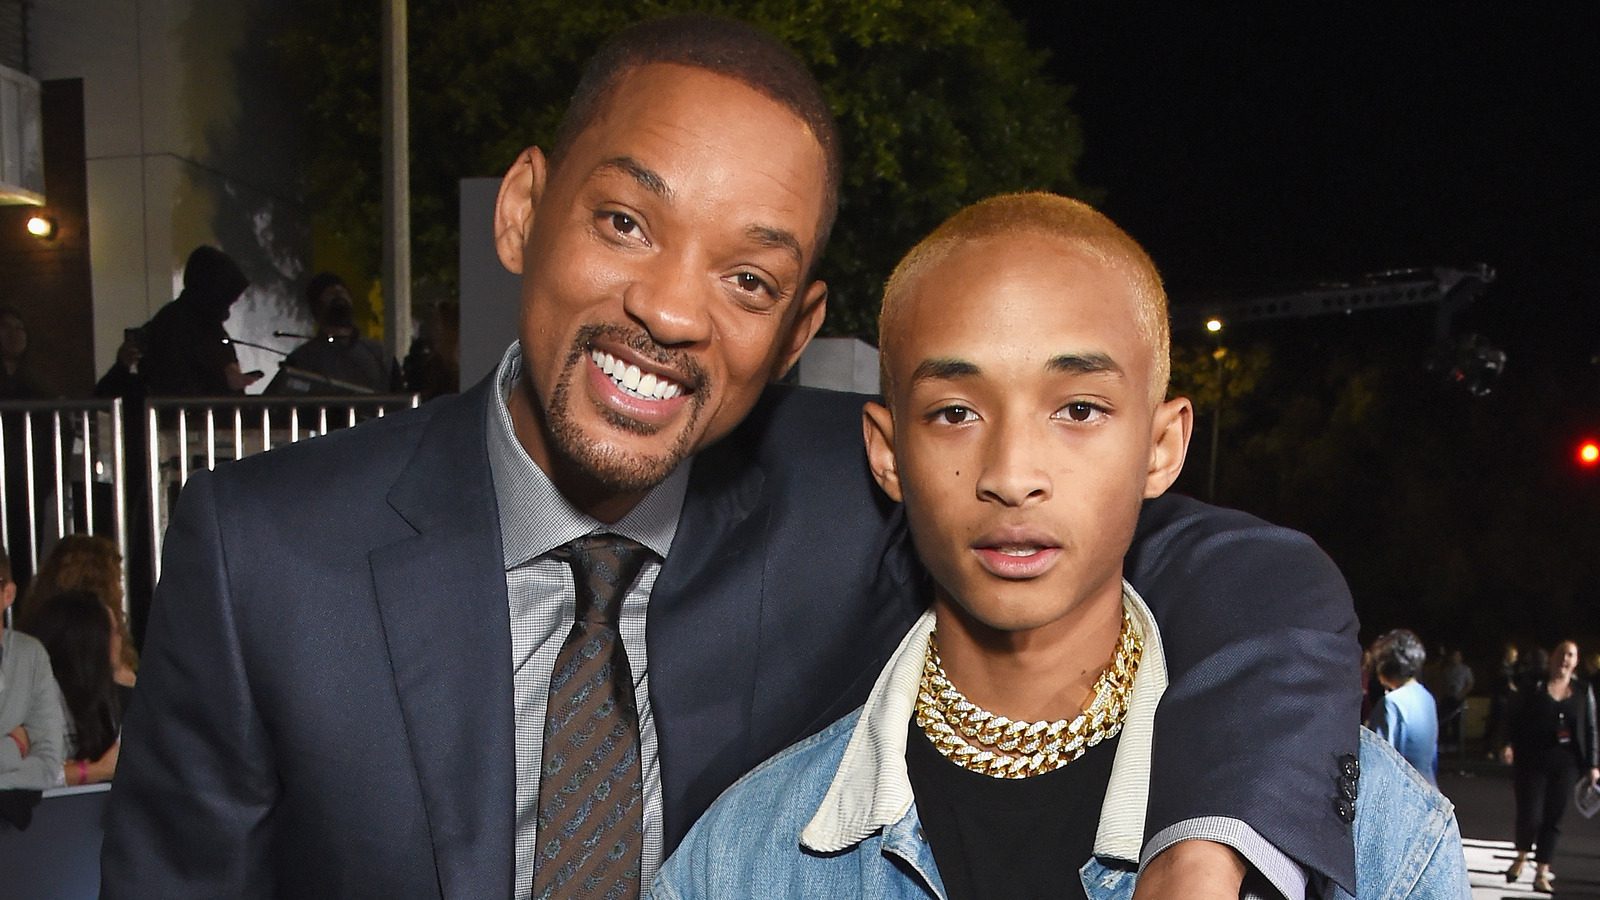 Which Movies Did Will Smith & Jaden Co-Star Together